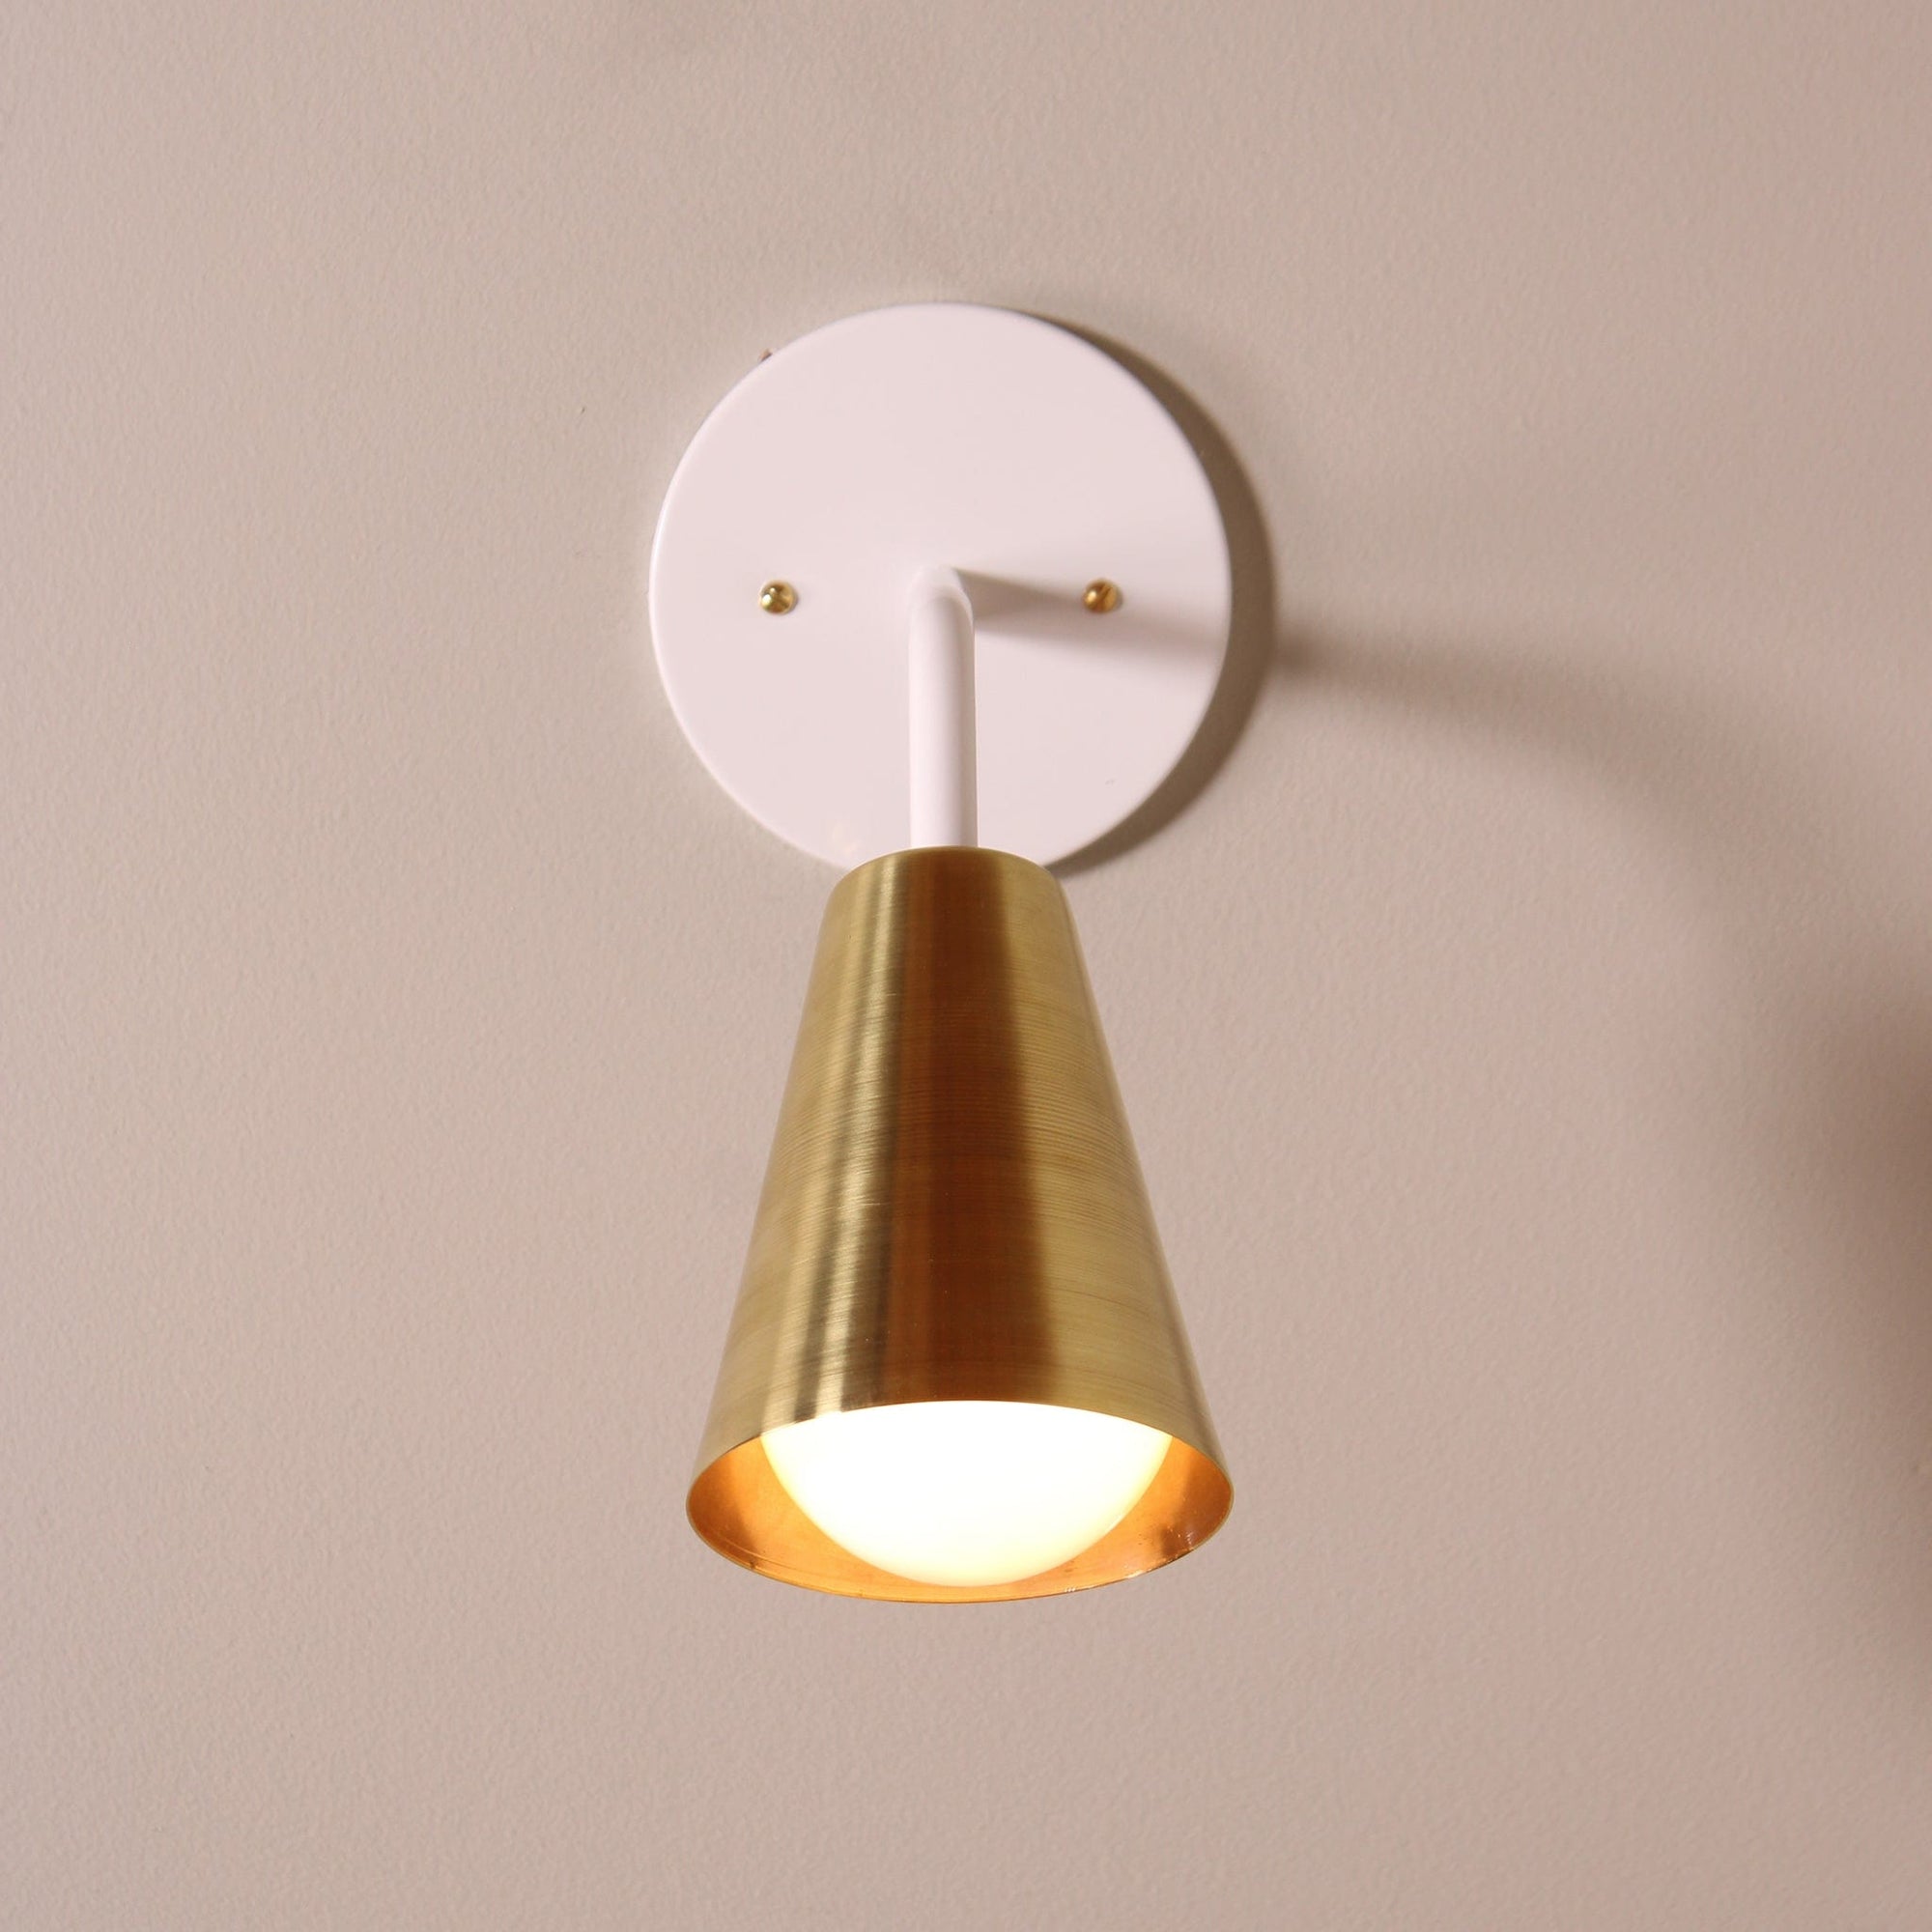 Monte Carlo wall sconce White / Brass shade onefortythree